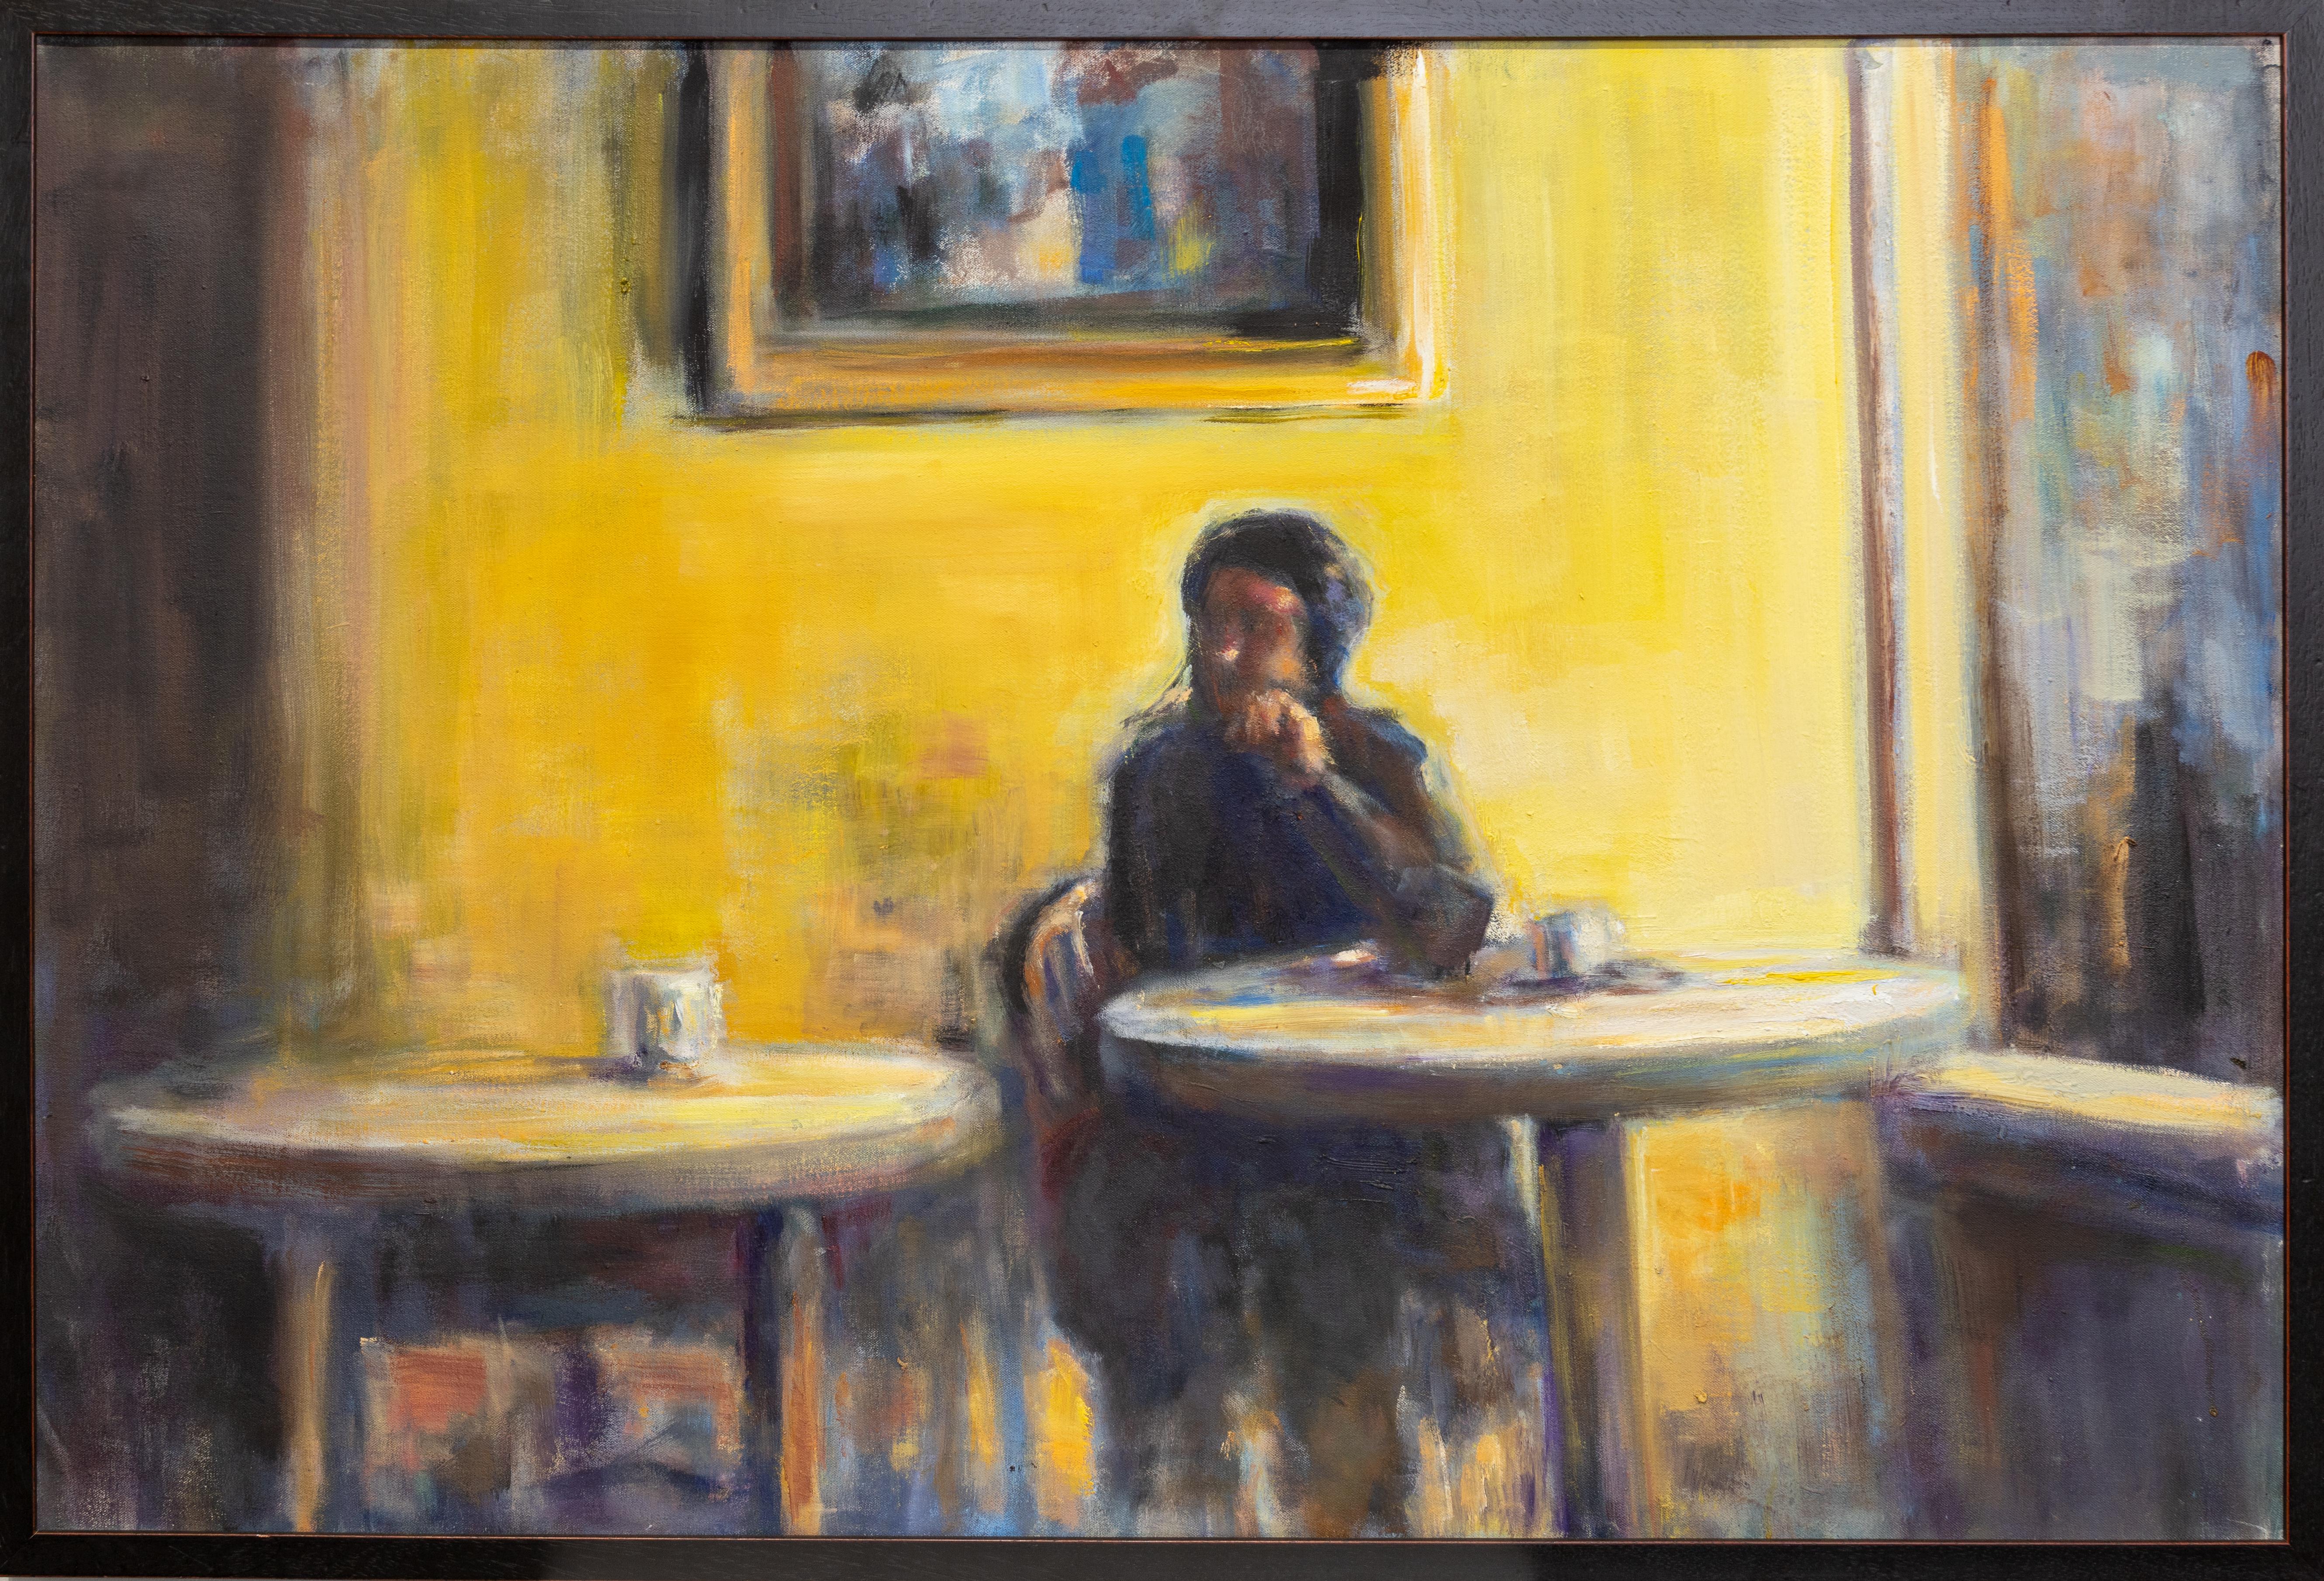 John Osler Figurative Painting - "One More Day" Figurative, Cafe, Interior, Yellow, Blue, Oil, Canvas